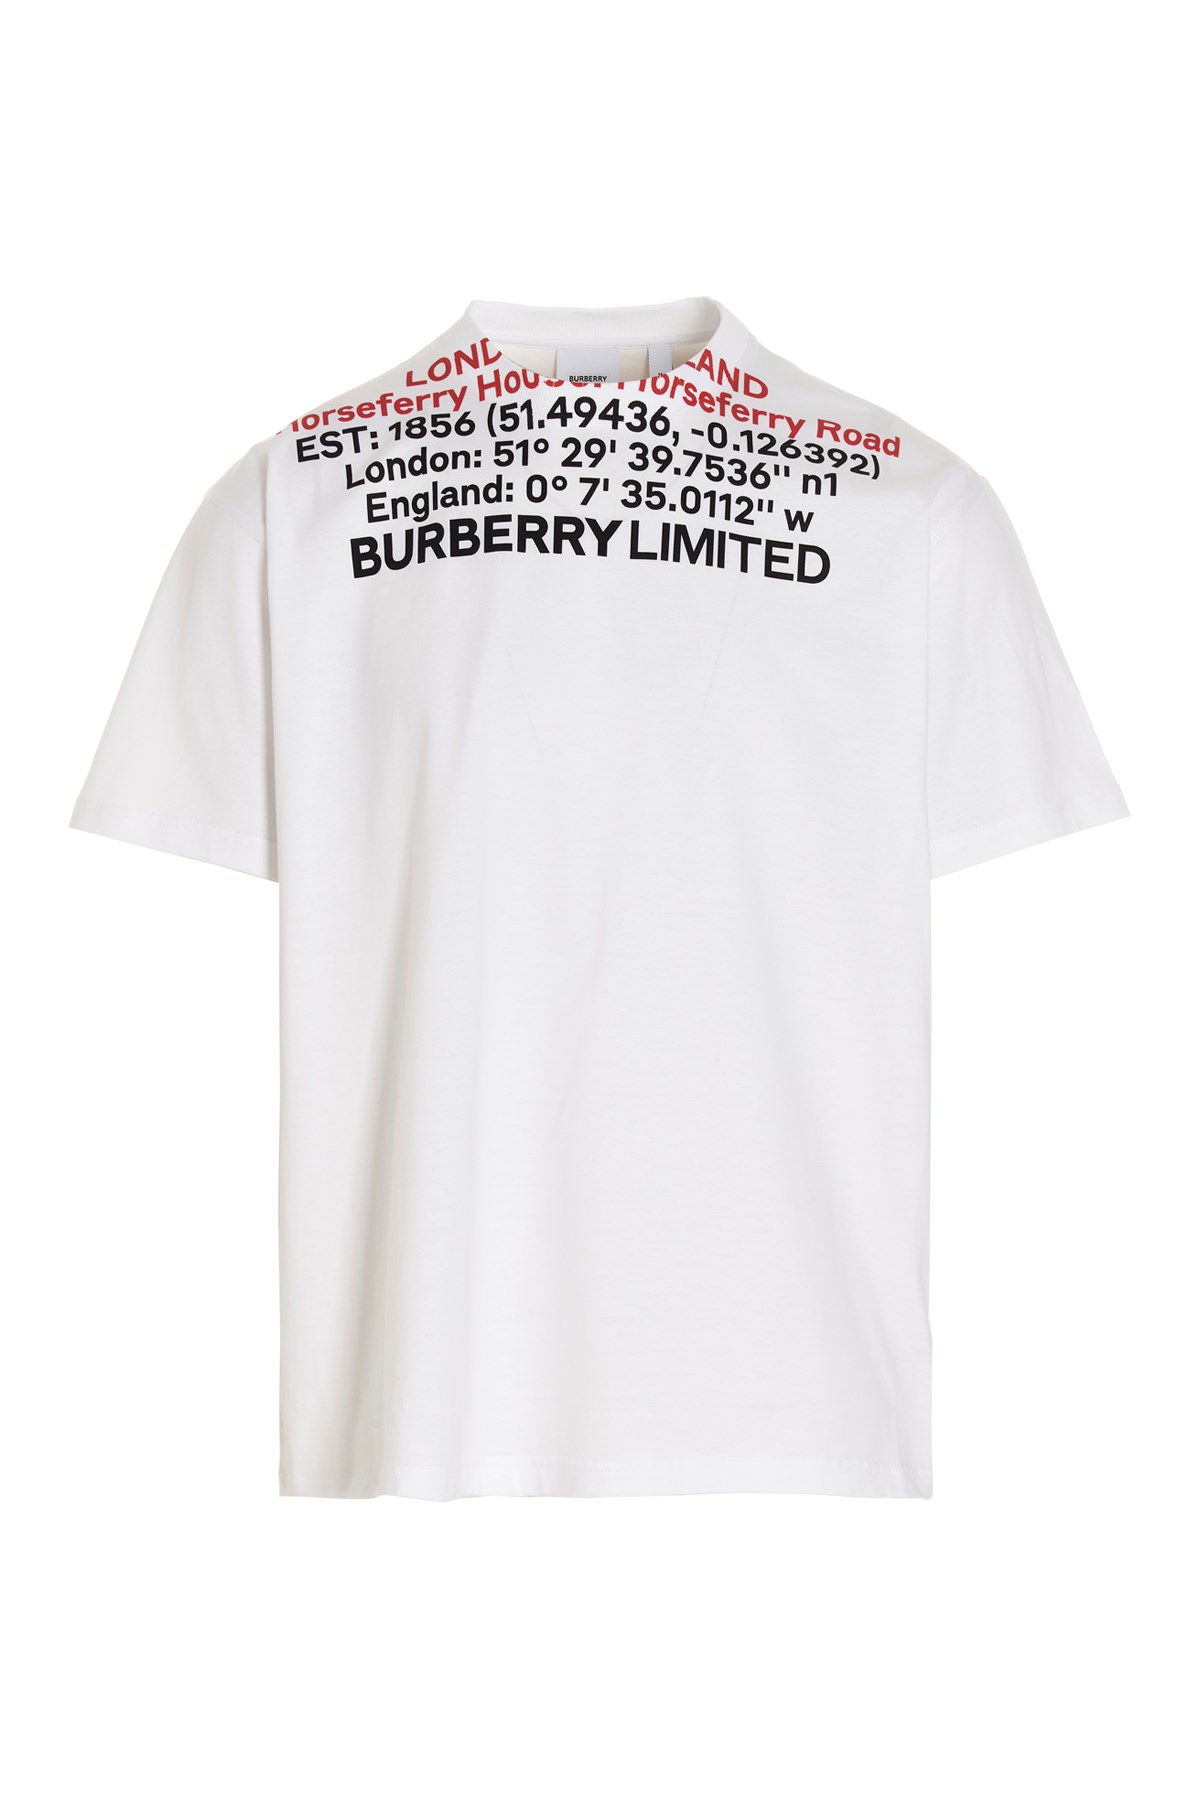 BURBERRY Geographic Coordinates T-Shirt